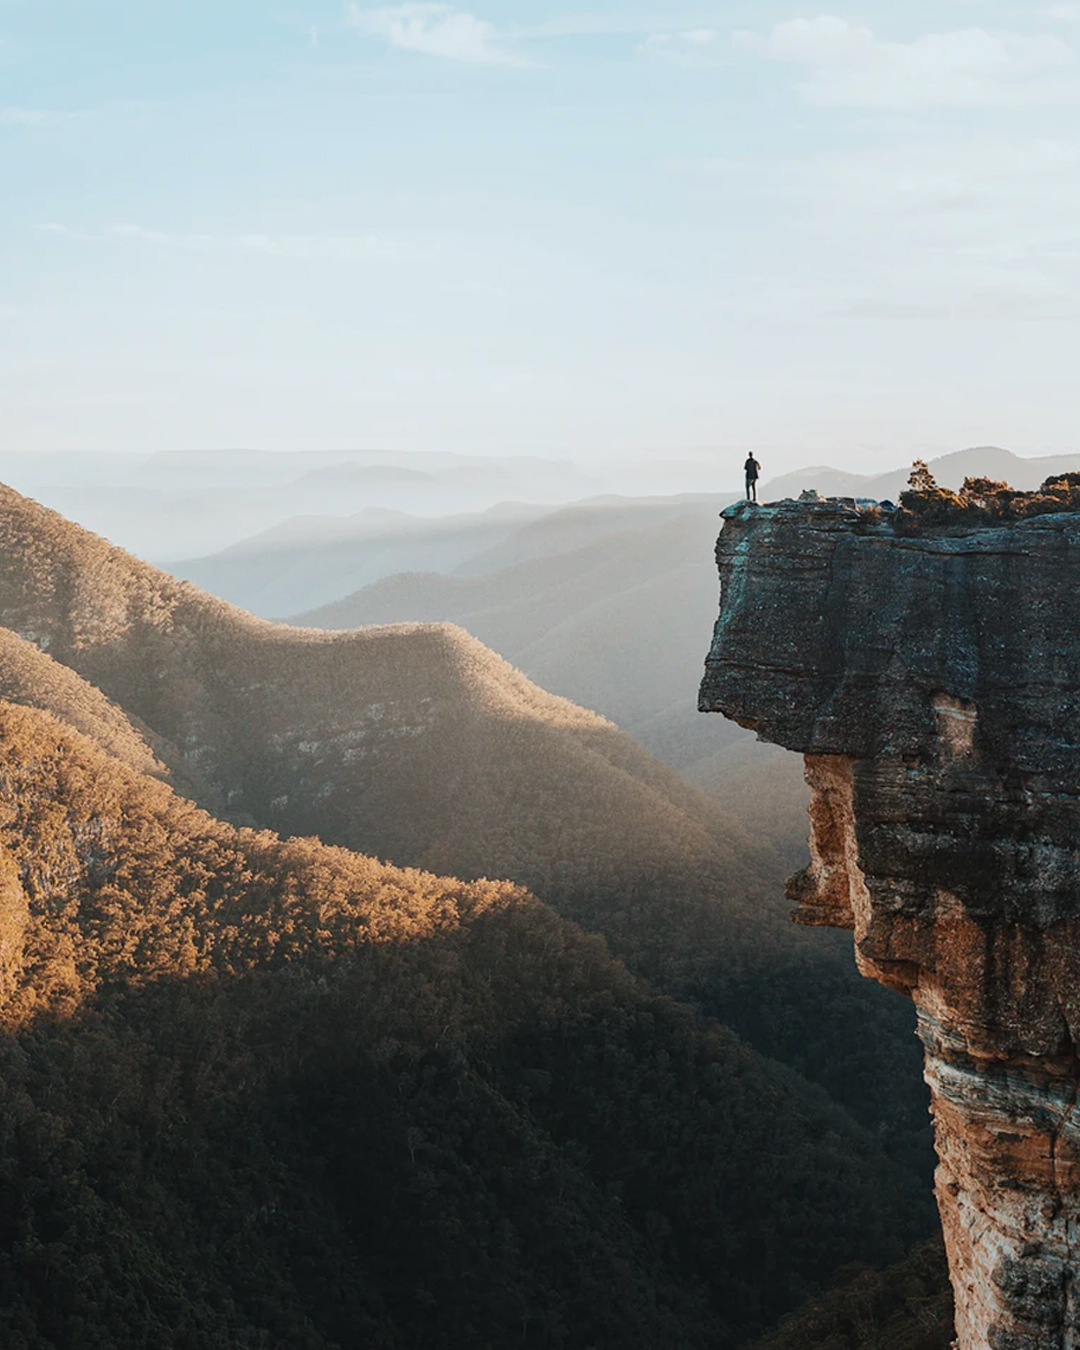 view from mountain in sydney's blue mountain ranges, man standing on edge of cliff